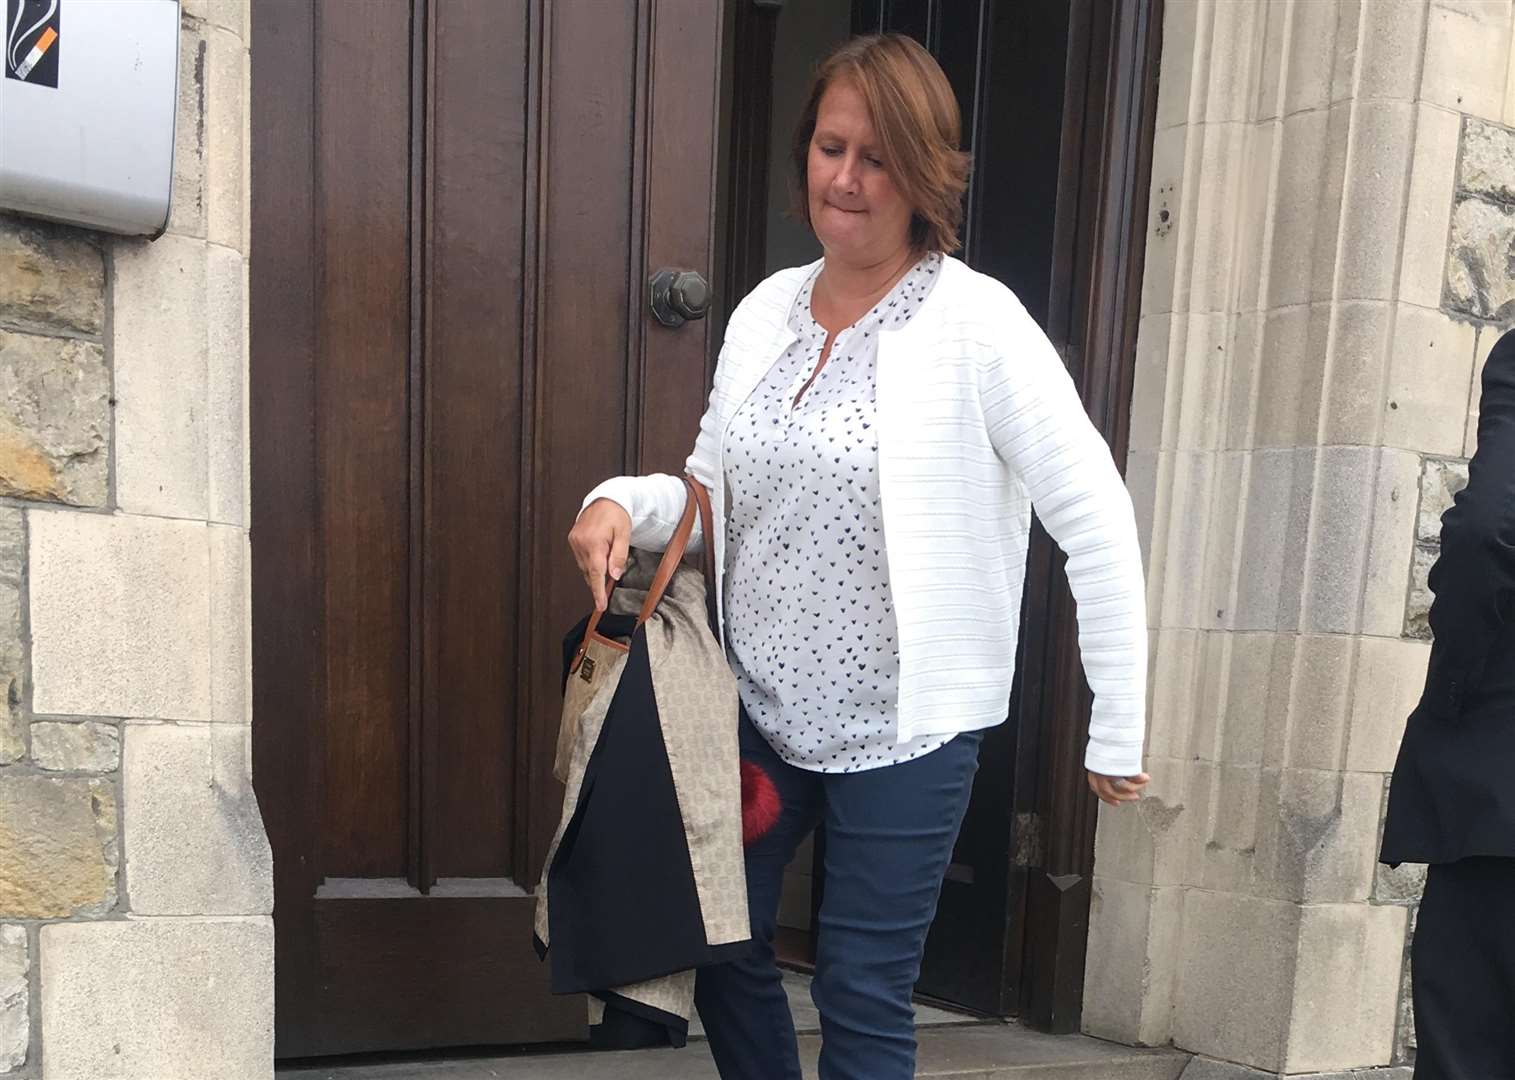 Jane Stockford leaves Maidstone Magistrates Court after receiving a suspended prison sentence